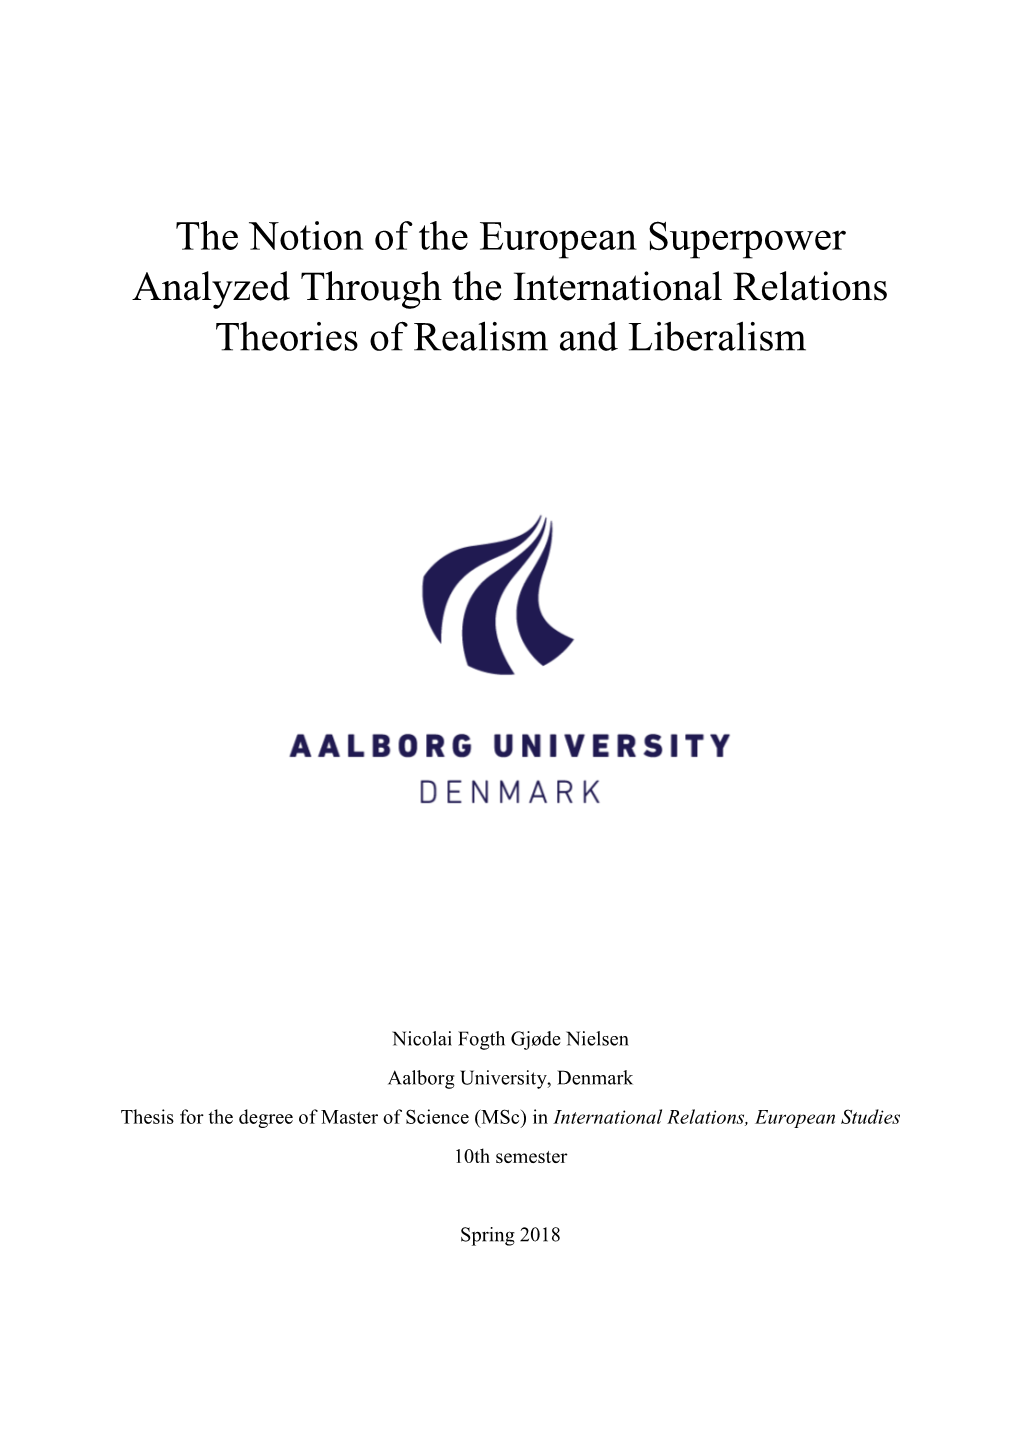 The Notion of the European Superpower Analyzed Through the International Relations Theories of Realism and Liberalism